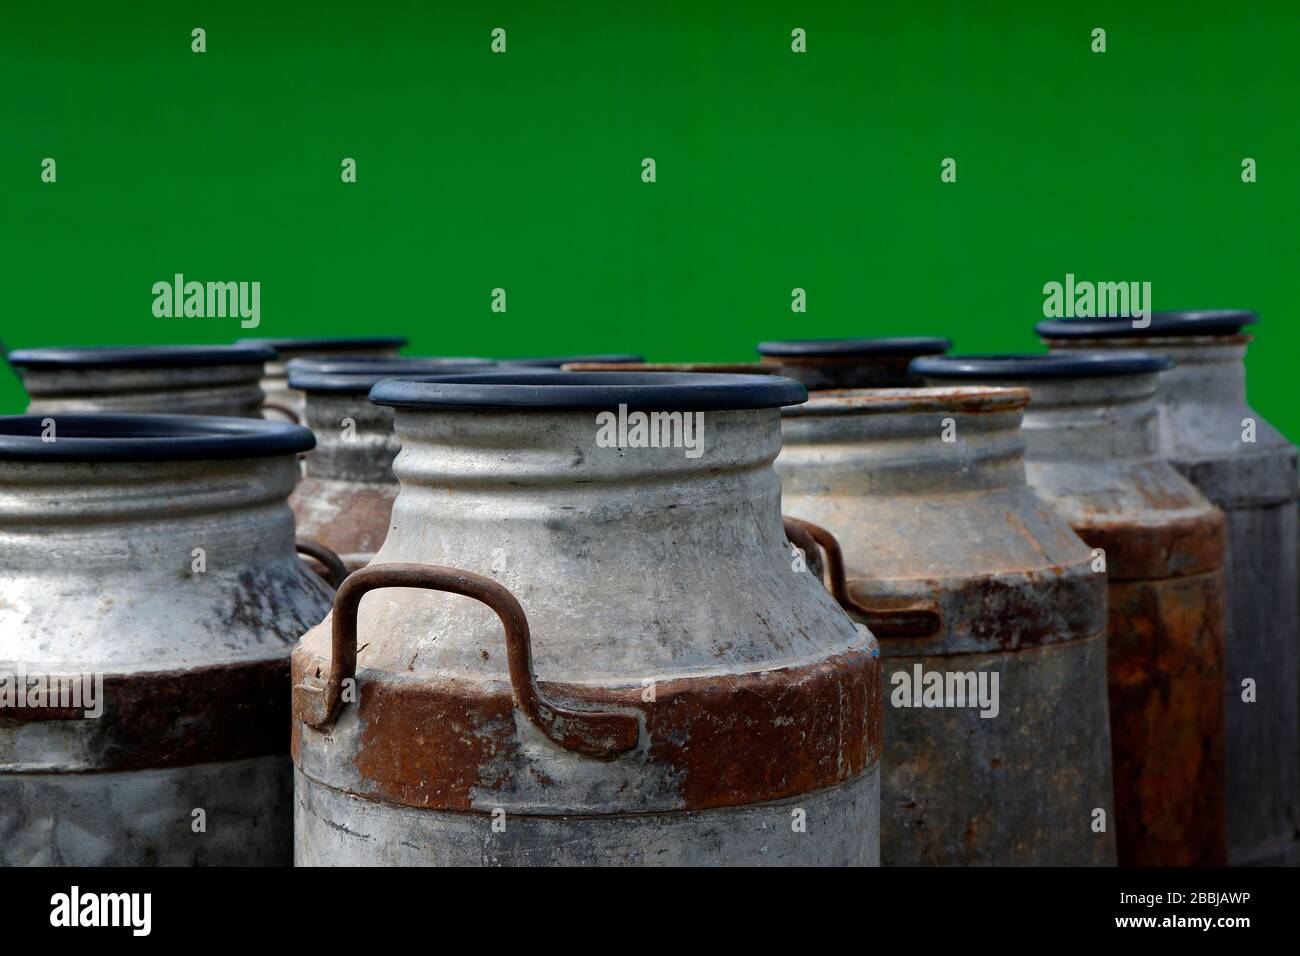 group of old metal cans for milk transport and handling Stock Photo